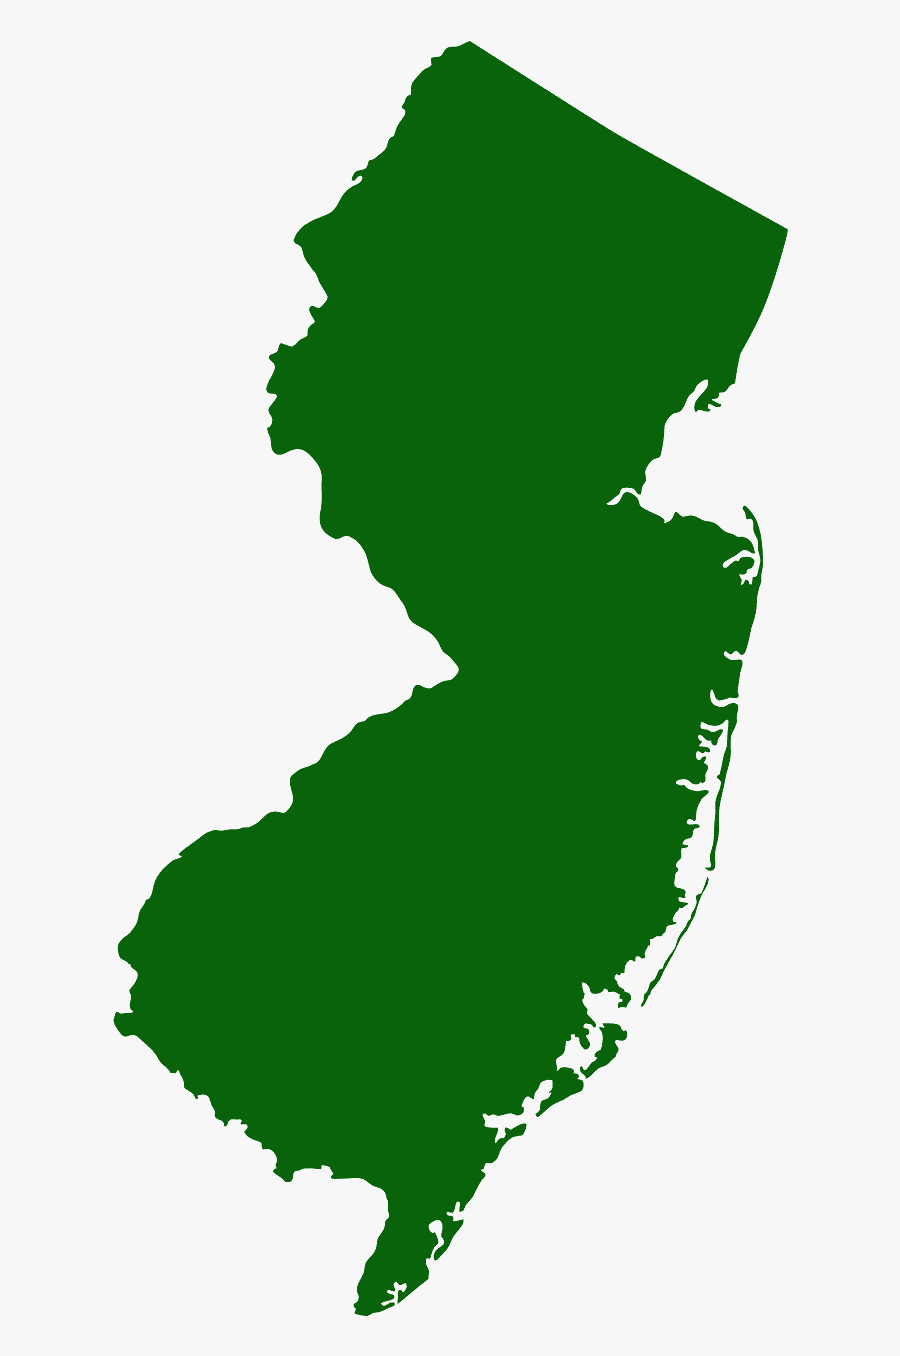 New Jersey 2016 Election Map, Transparent Clipart